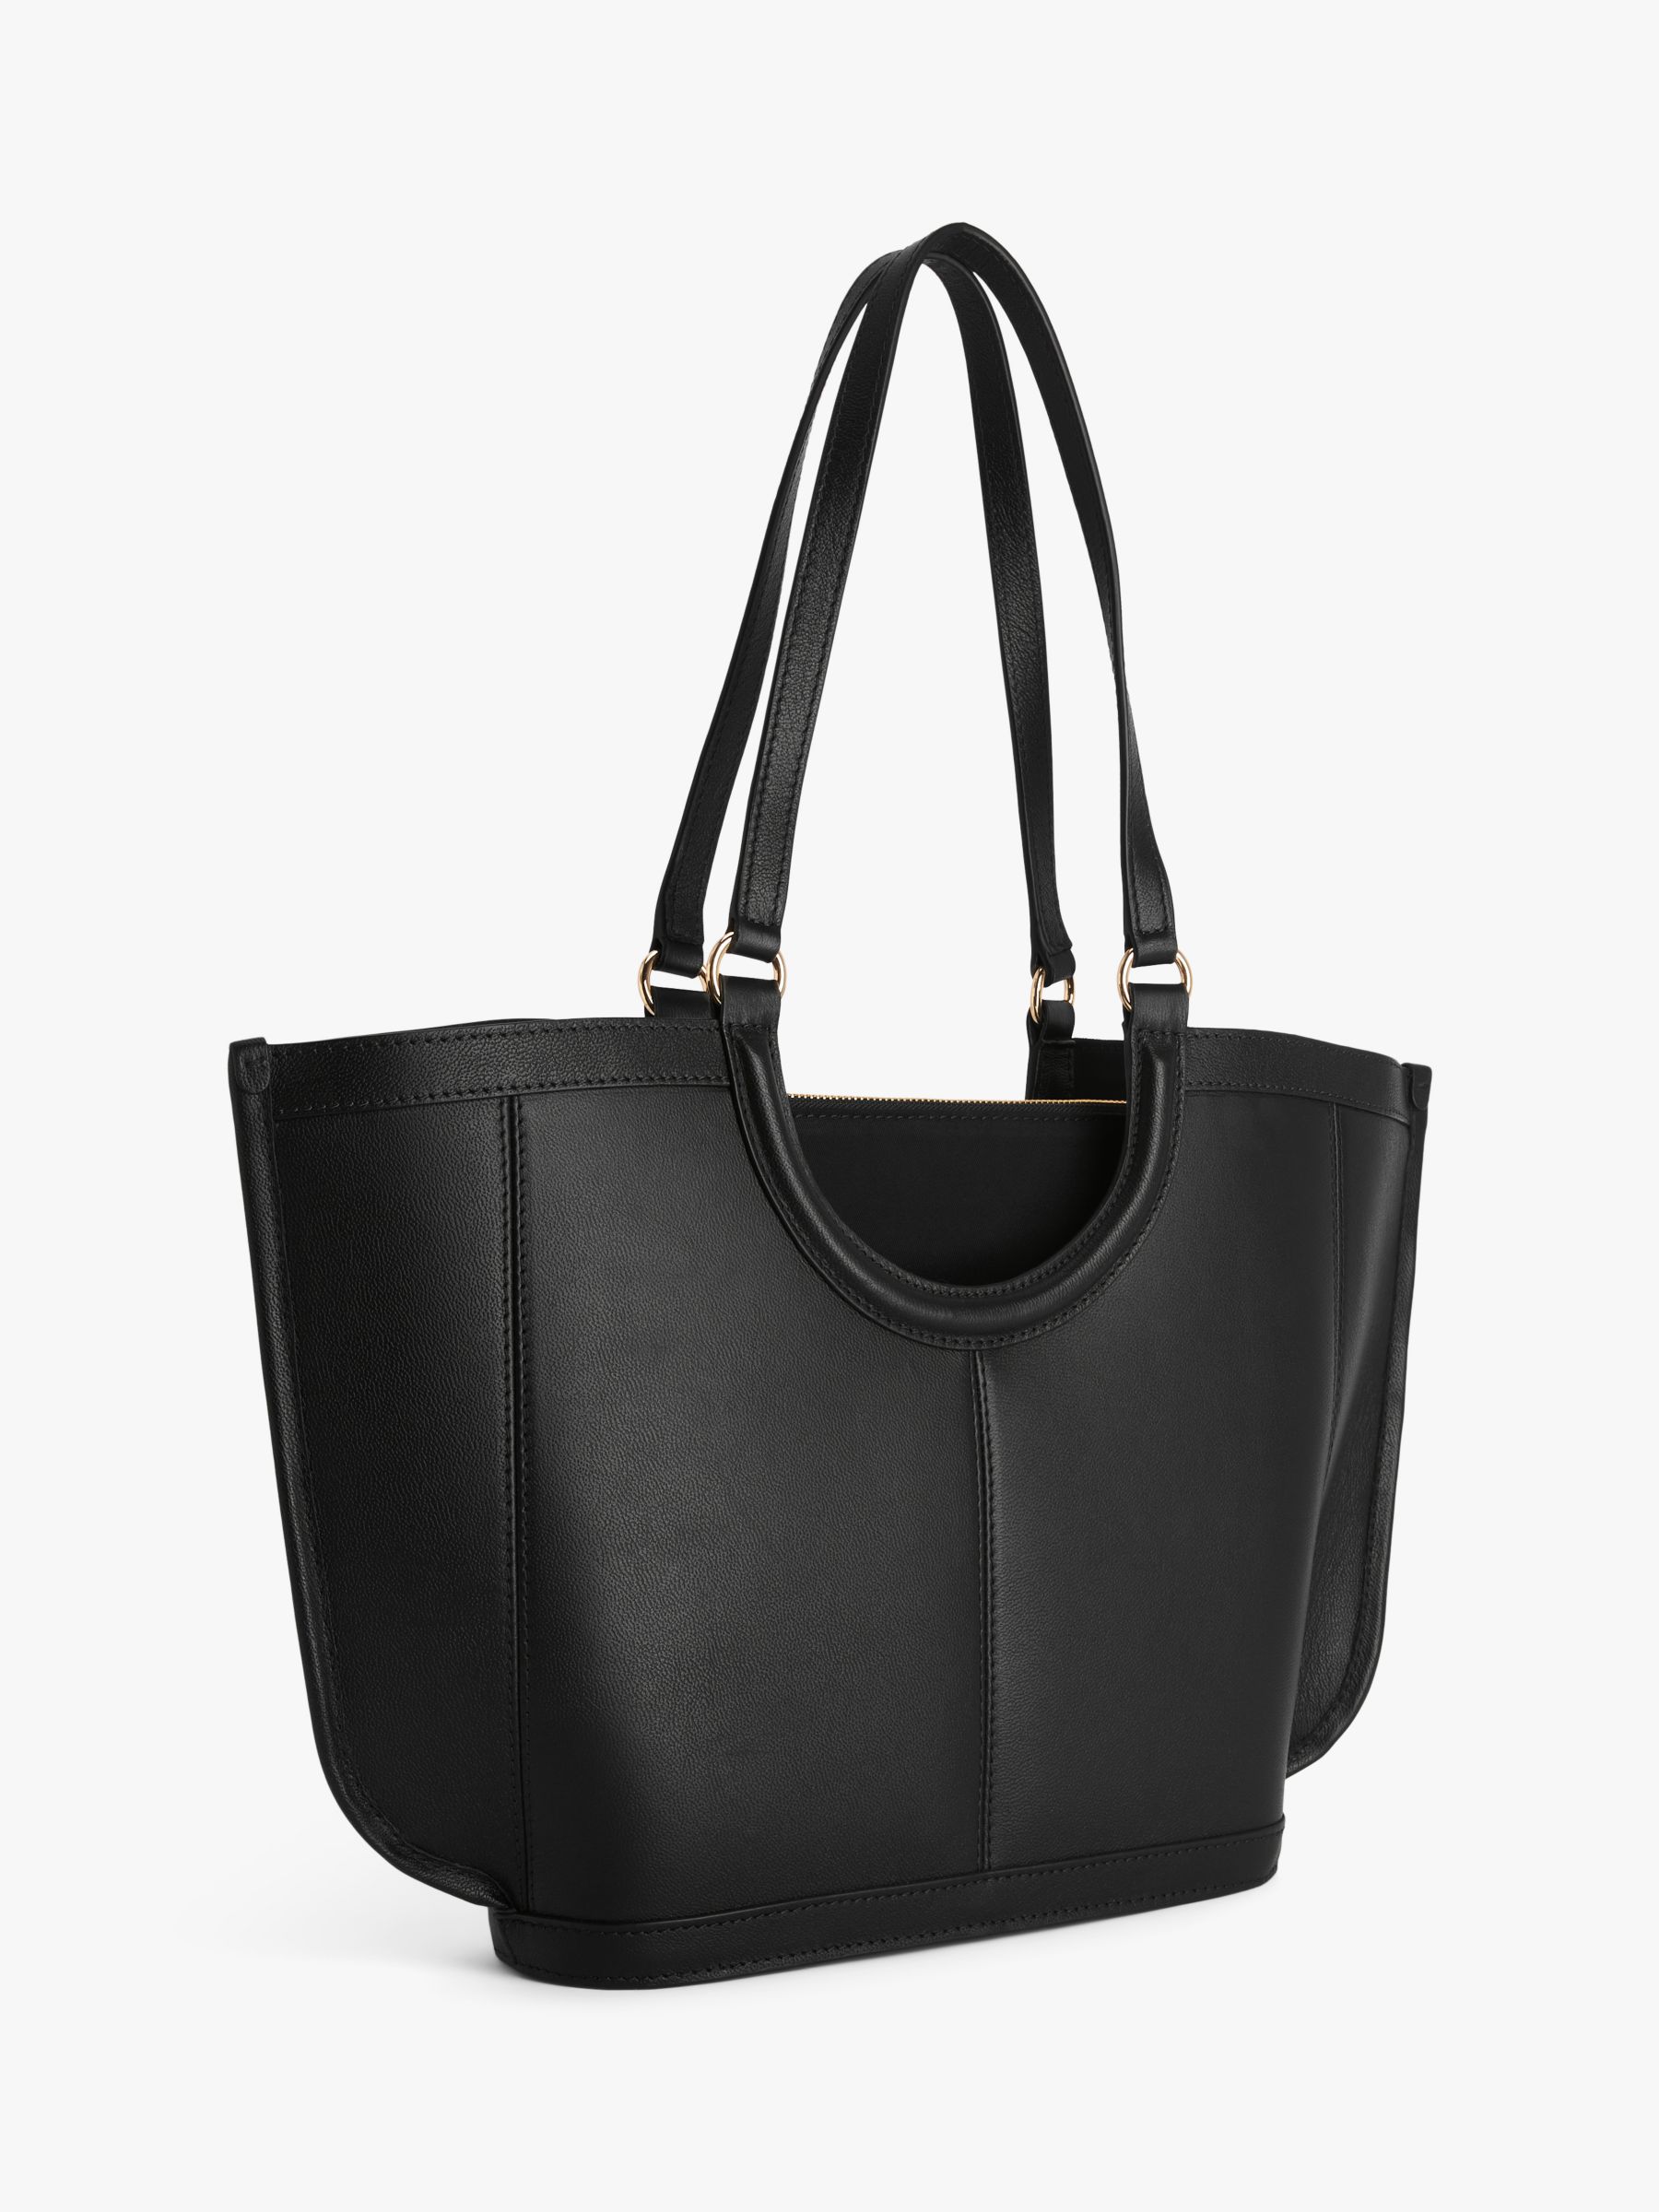 See By Chloé Mara Suede Leather Tote Bag, Black